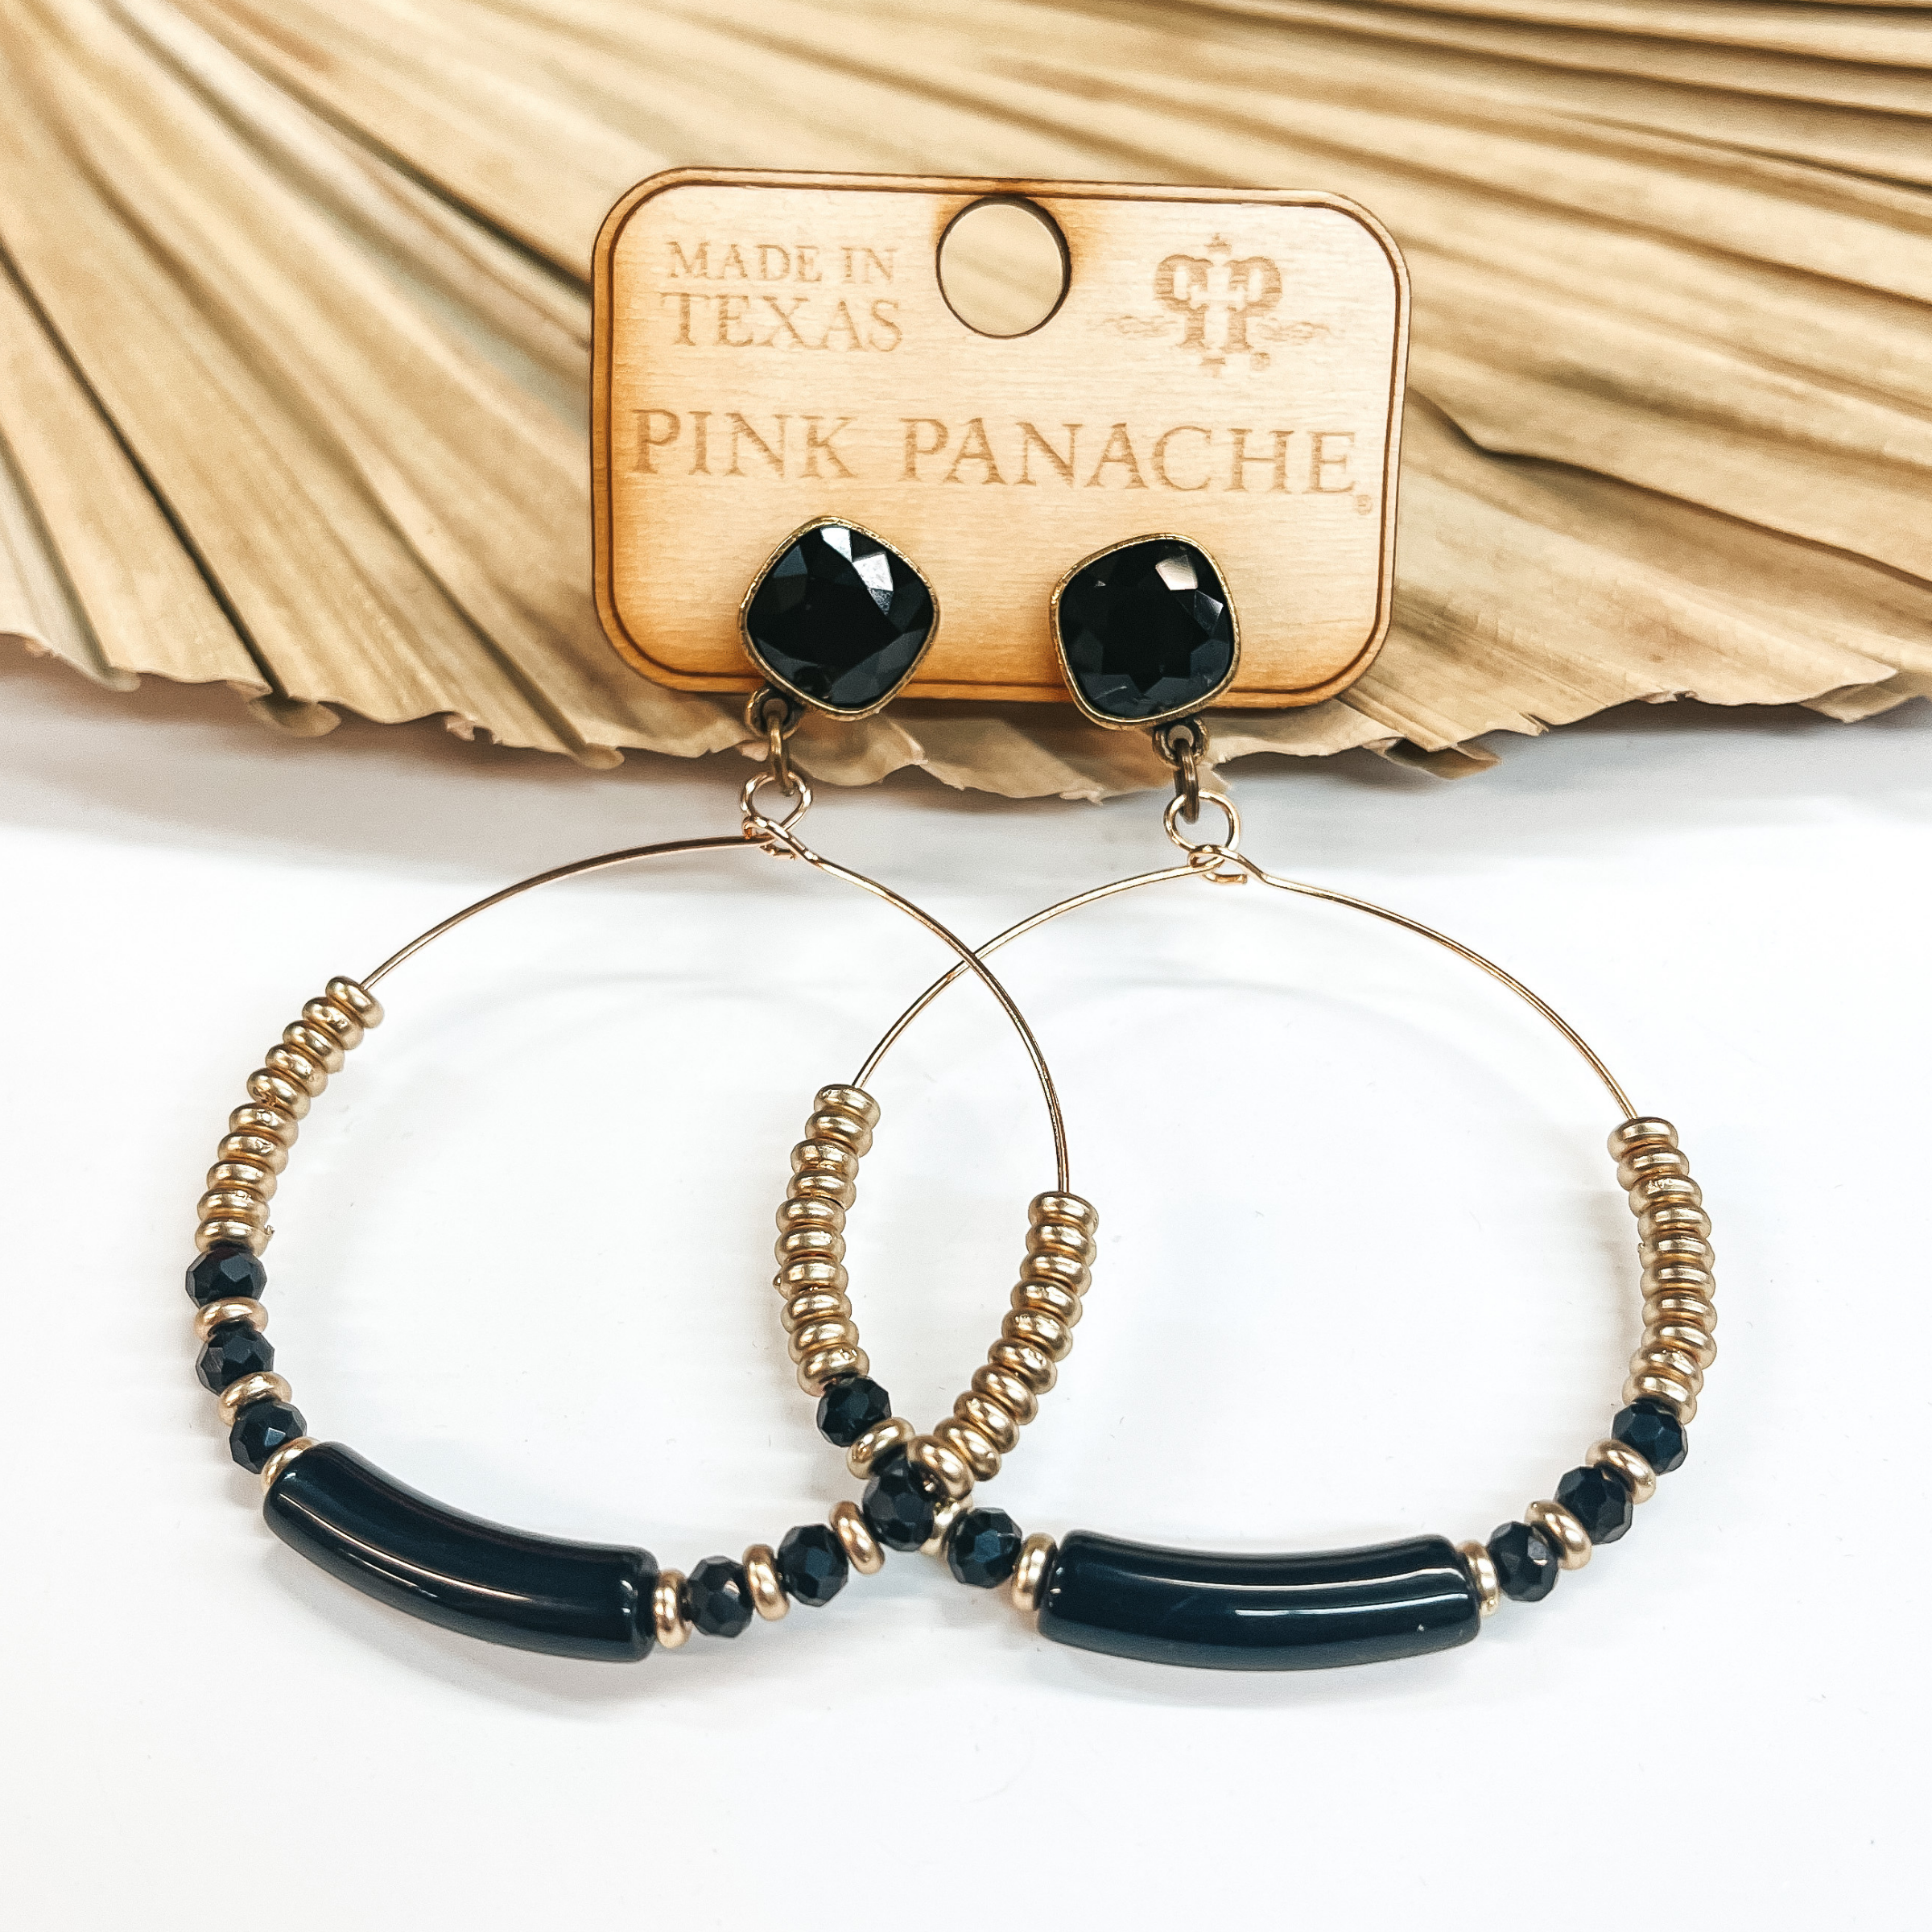 These are black cushion cut studded earrings with a  gold circle drop. The hoop has a long black bead in  the center with matte gold beads and three black crystal beads on each side. They are taken on a white  background and leaned up against a dried up palm  leaf.